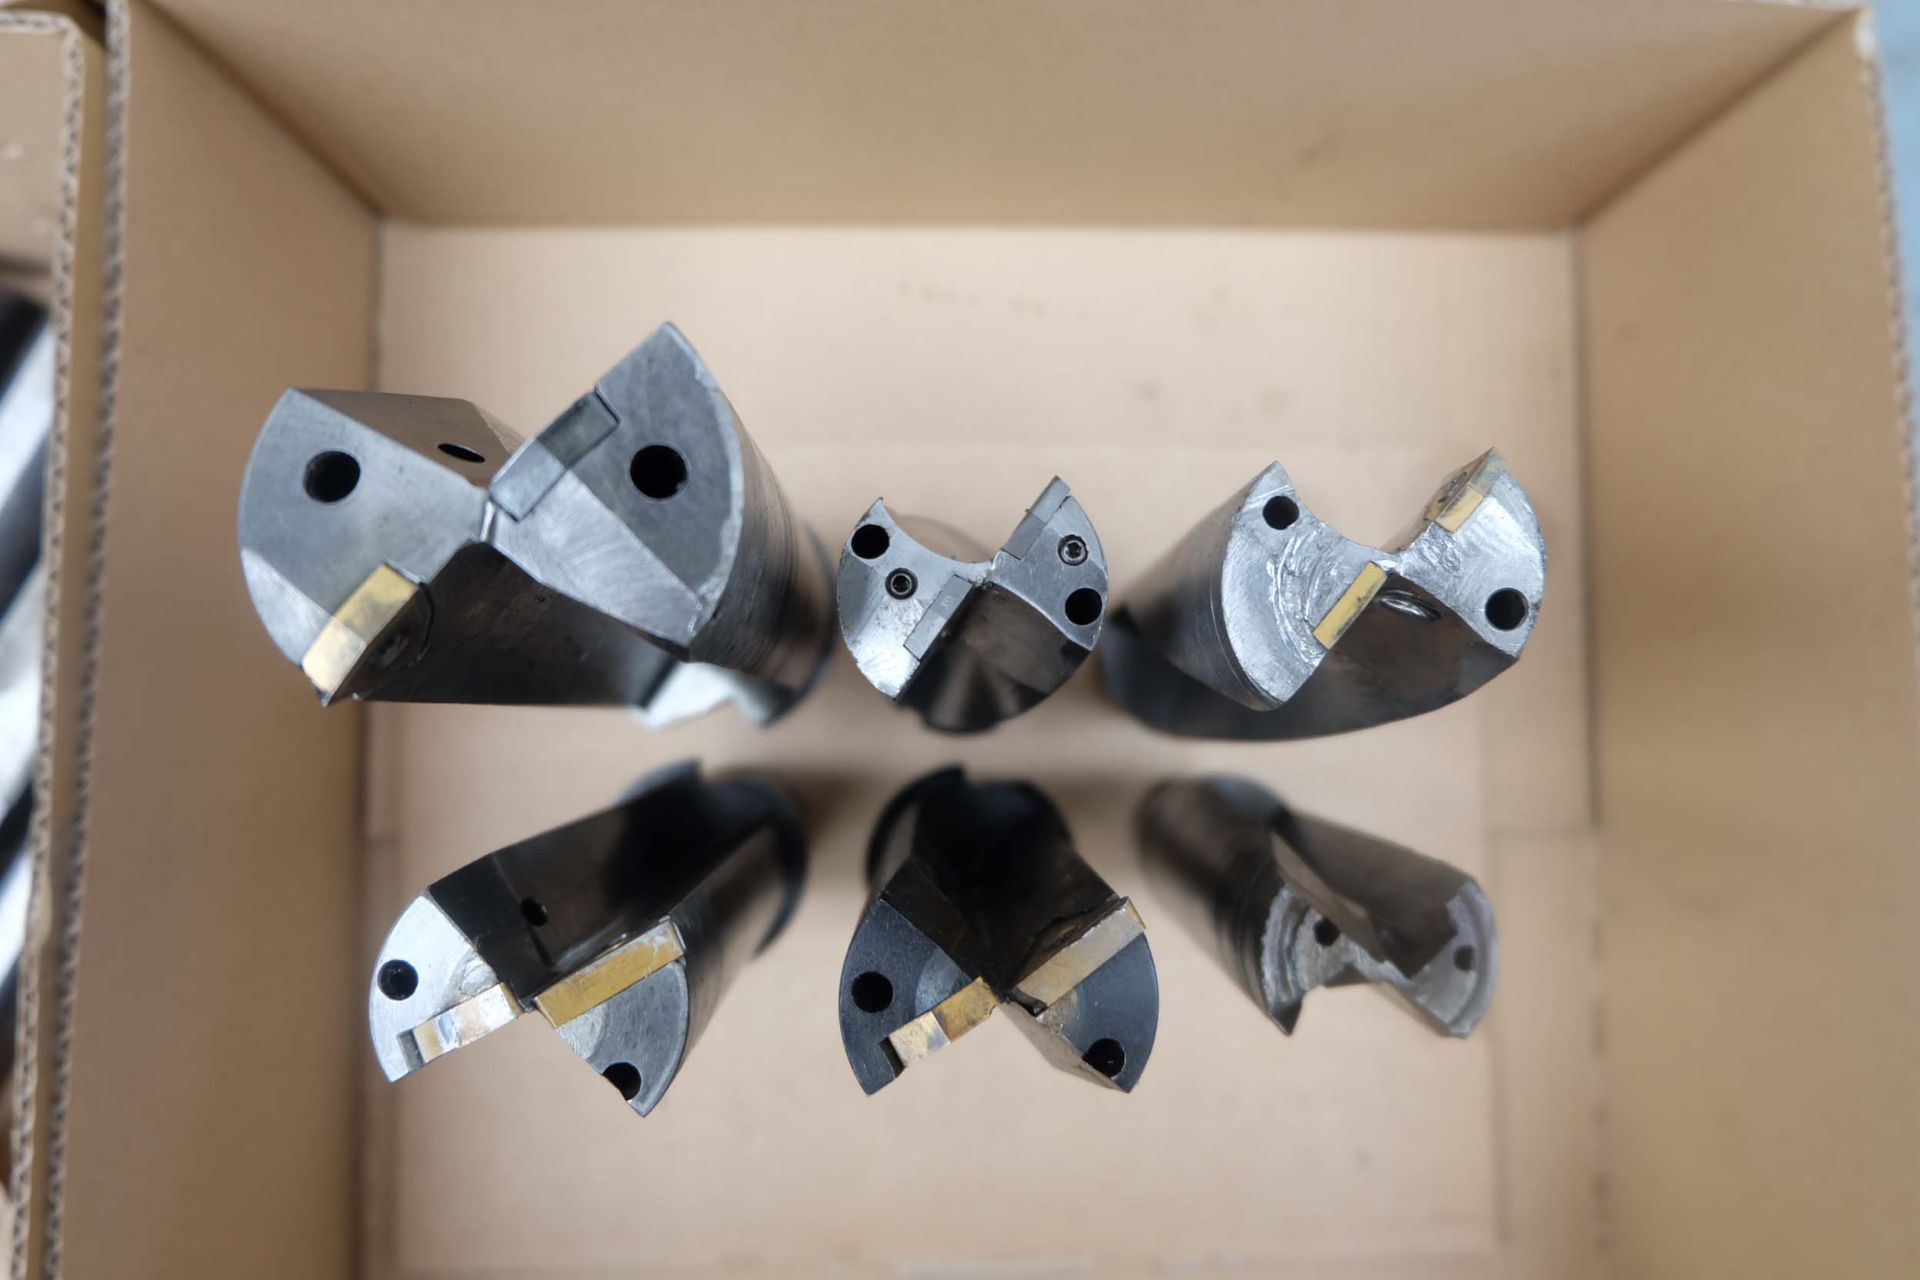 6 x Indexable Tipped 'U' Drills. Sizes upto 58mm Diameter. Shank Sizes 32mm & 40mm. - Image 2 of 3